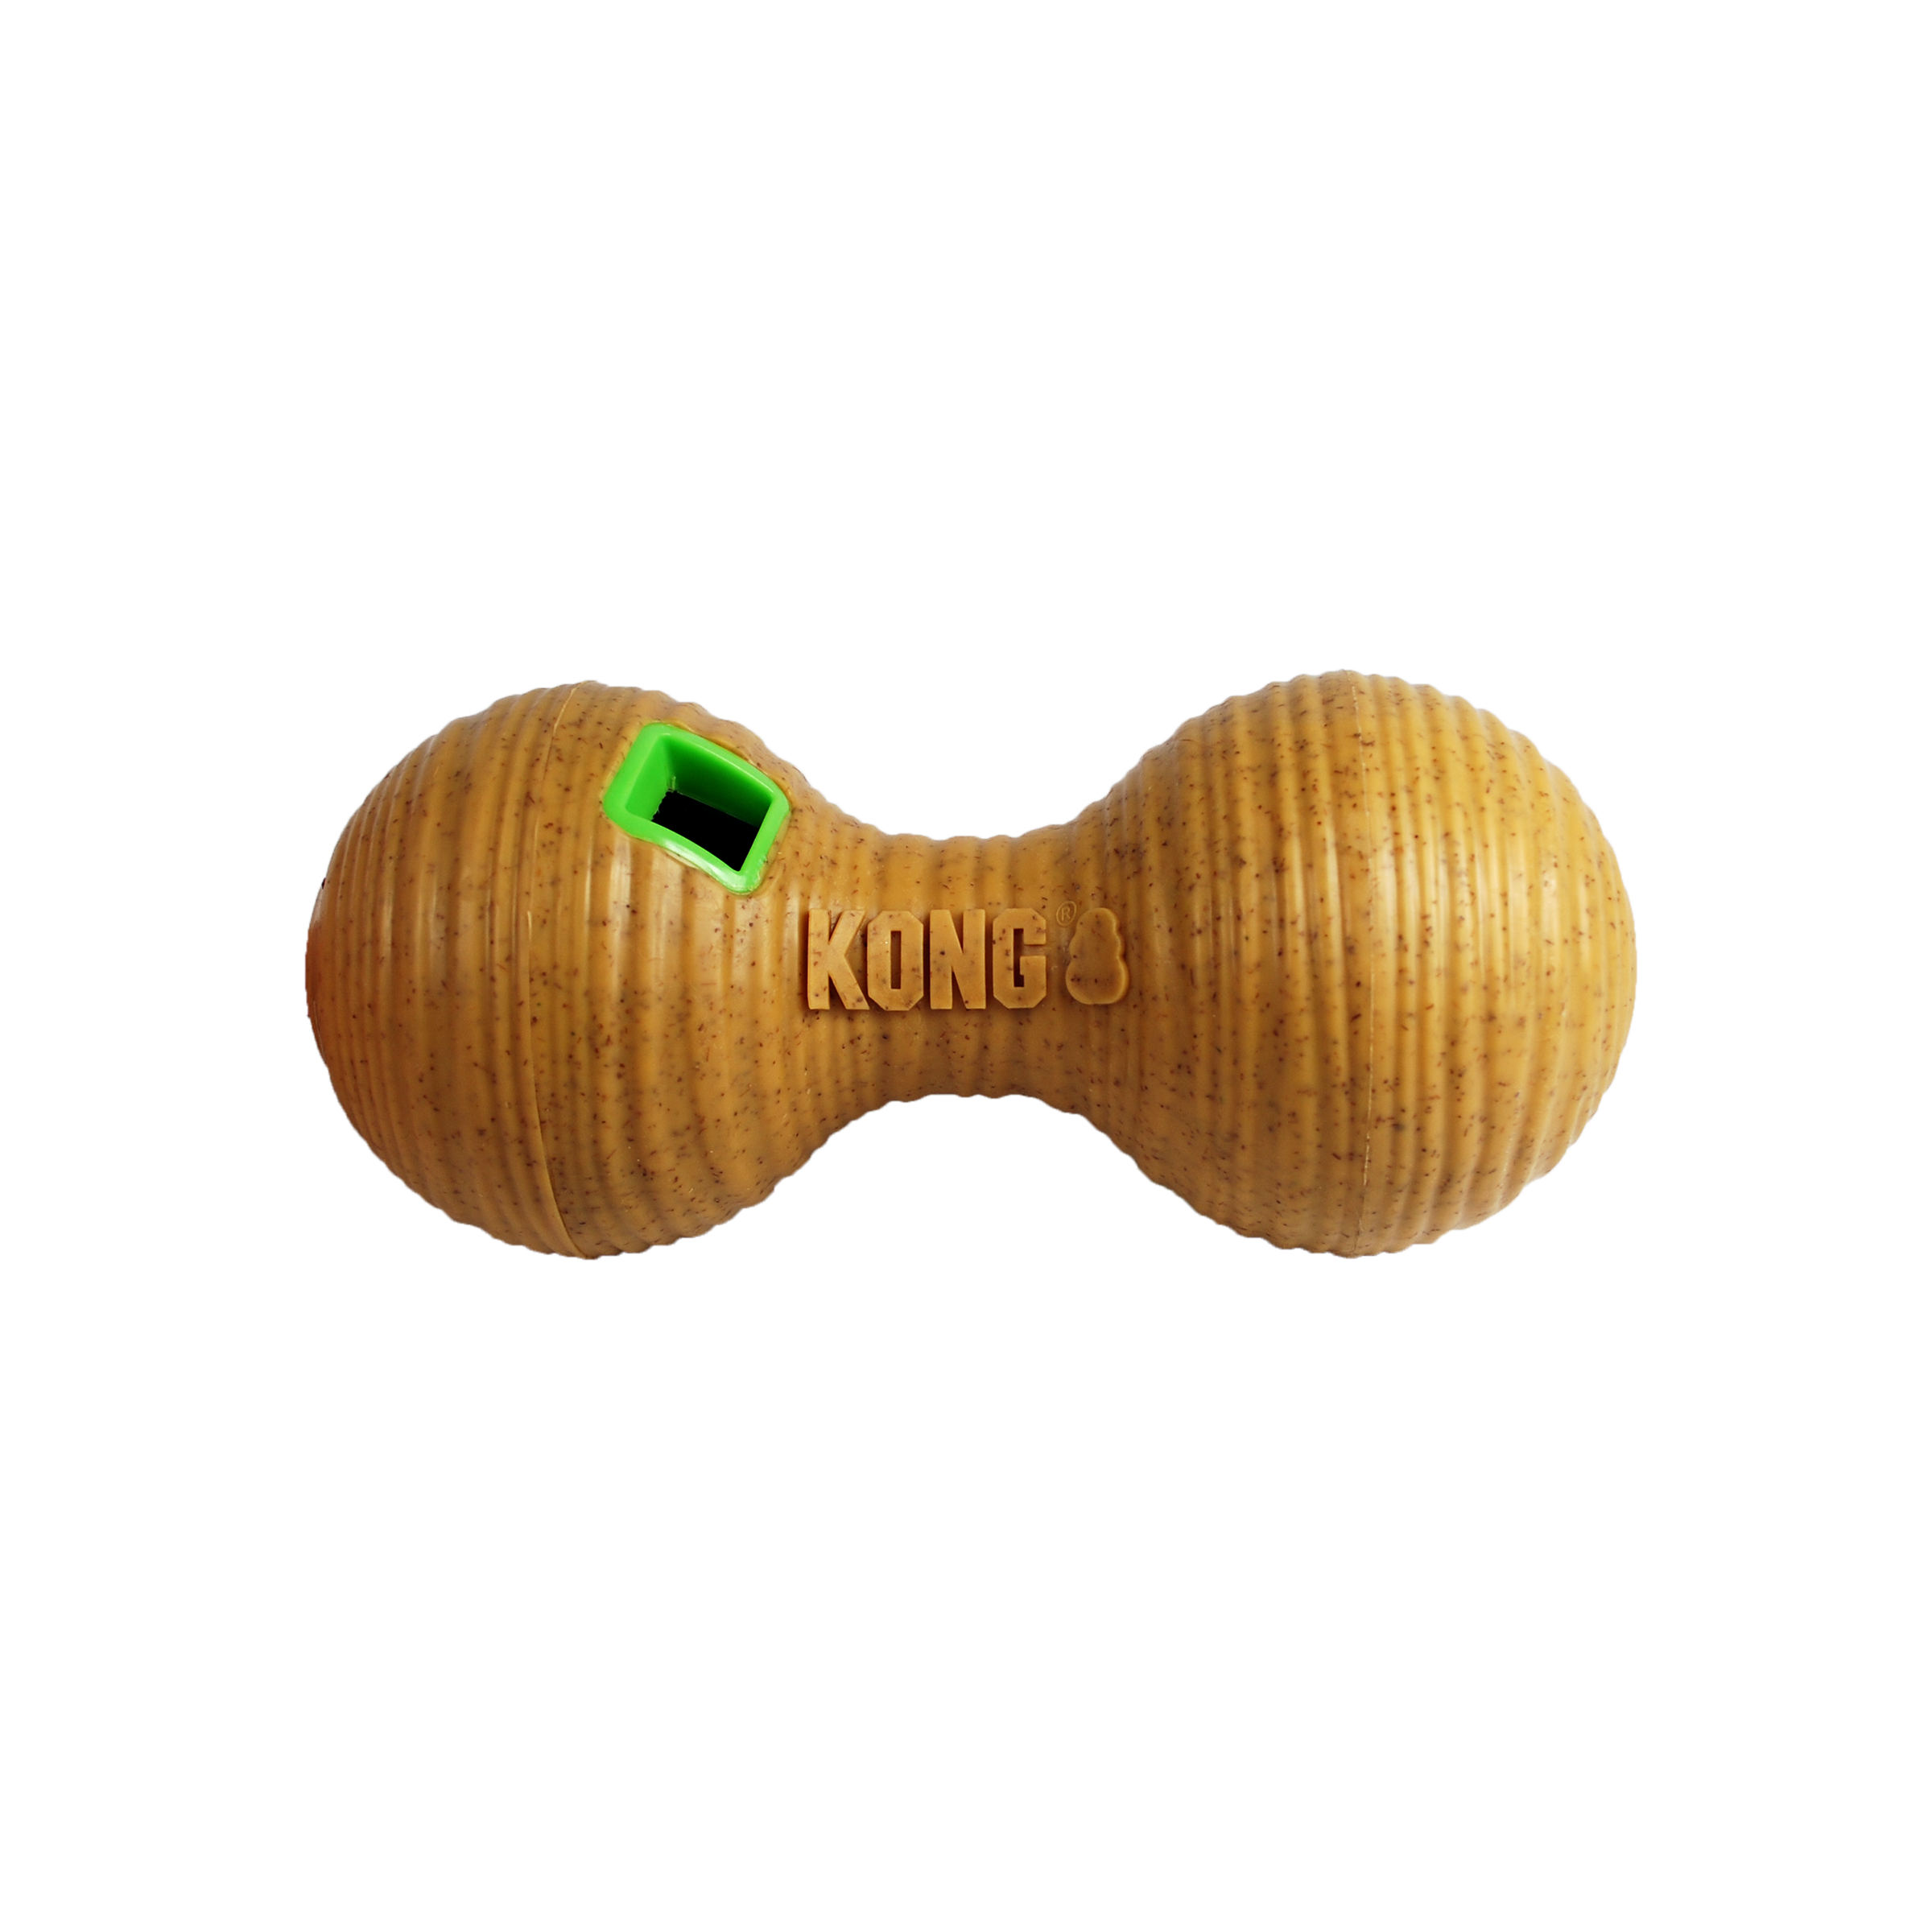 KONG Goodiez Ring Dog Toy, Medium | Paw of the Family